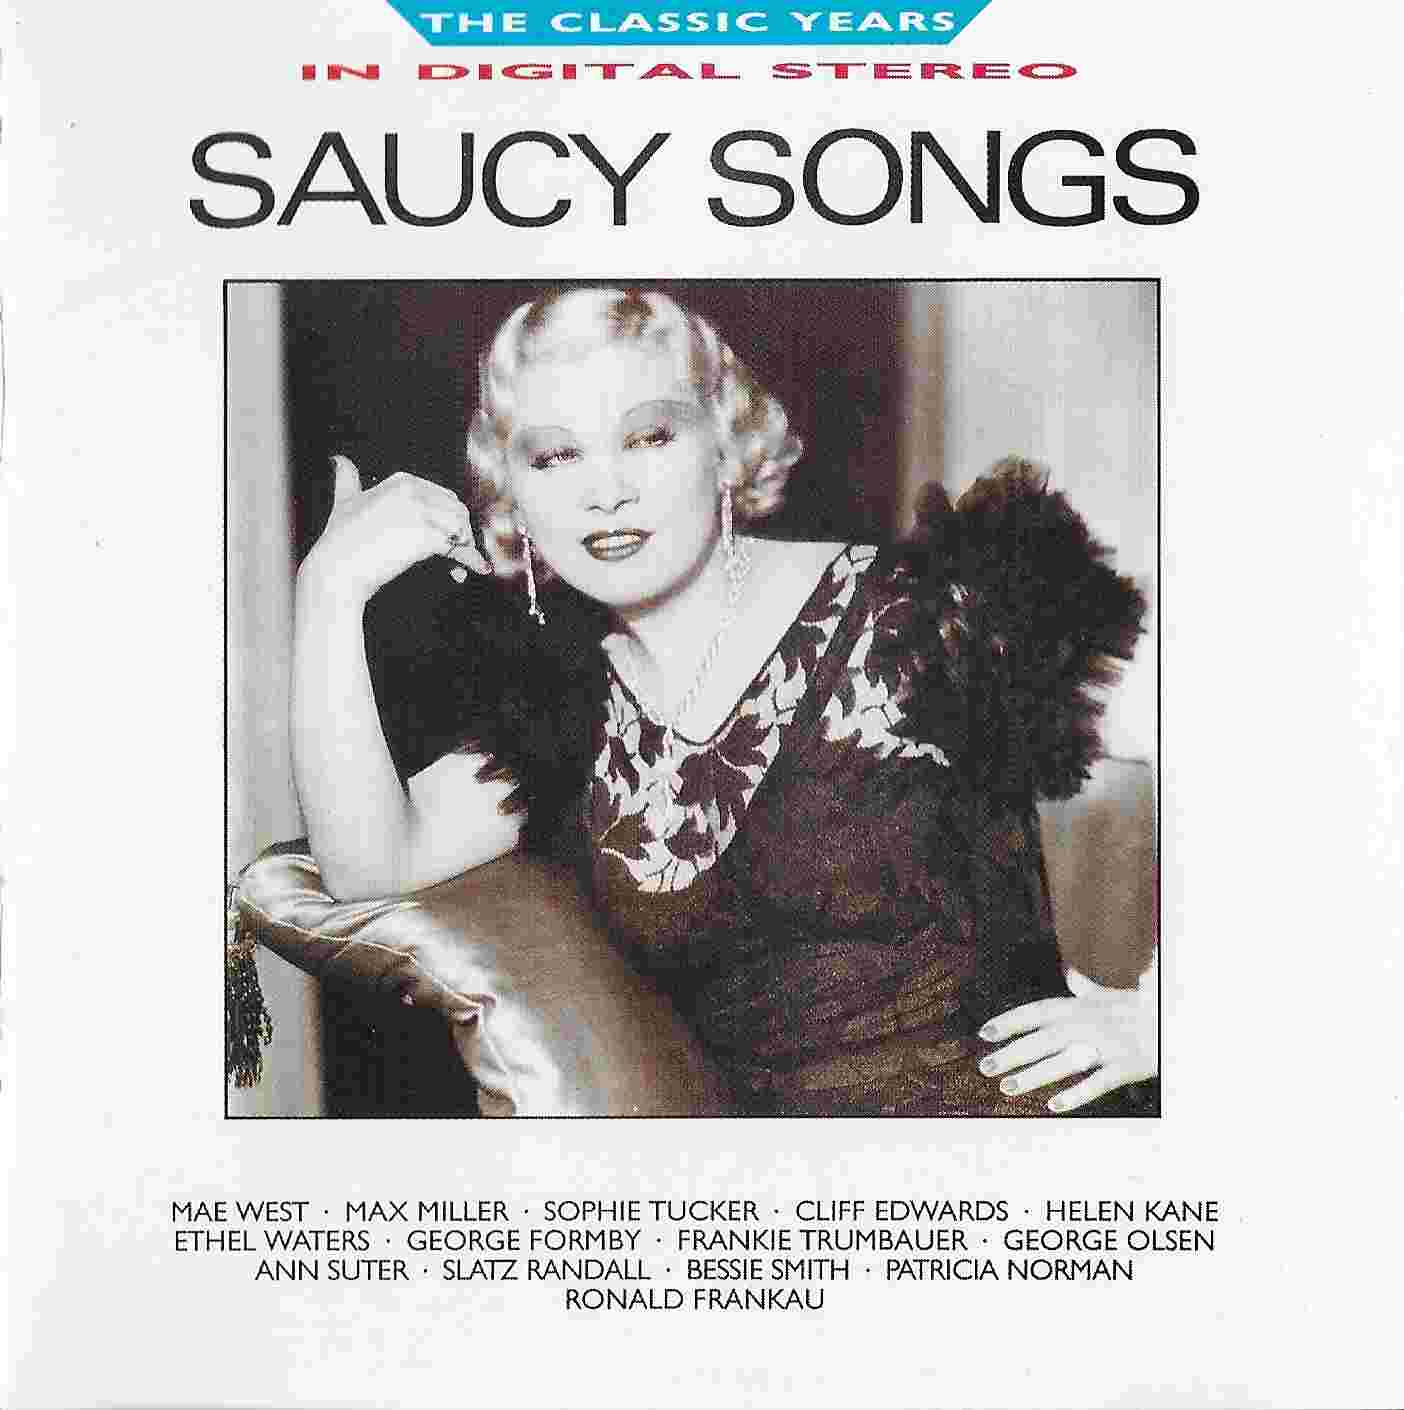 Picture of BBCCD728 Classic years - Saucy songs by artist Various from the BBC cds - Records and Tapes library